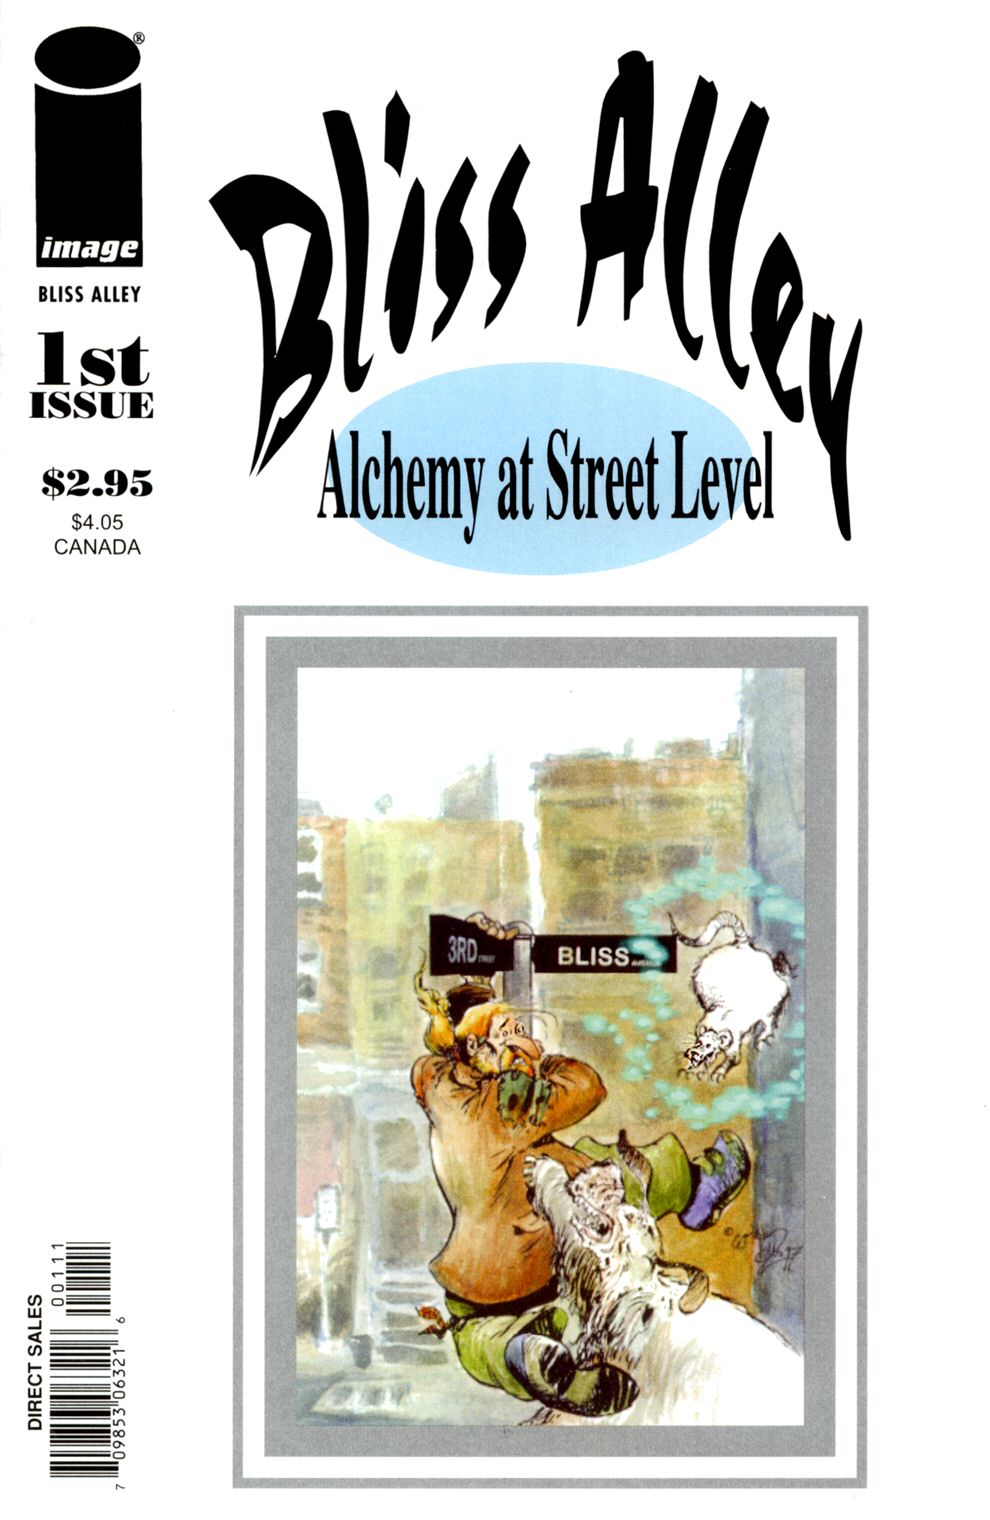 Read online Bliss Alley comic -  Issue #1 - 1